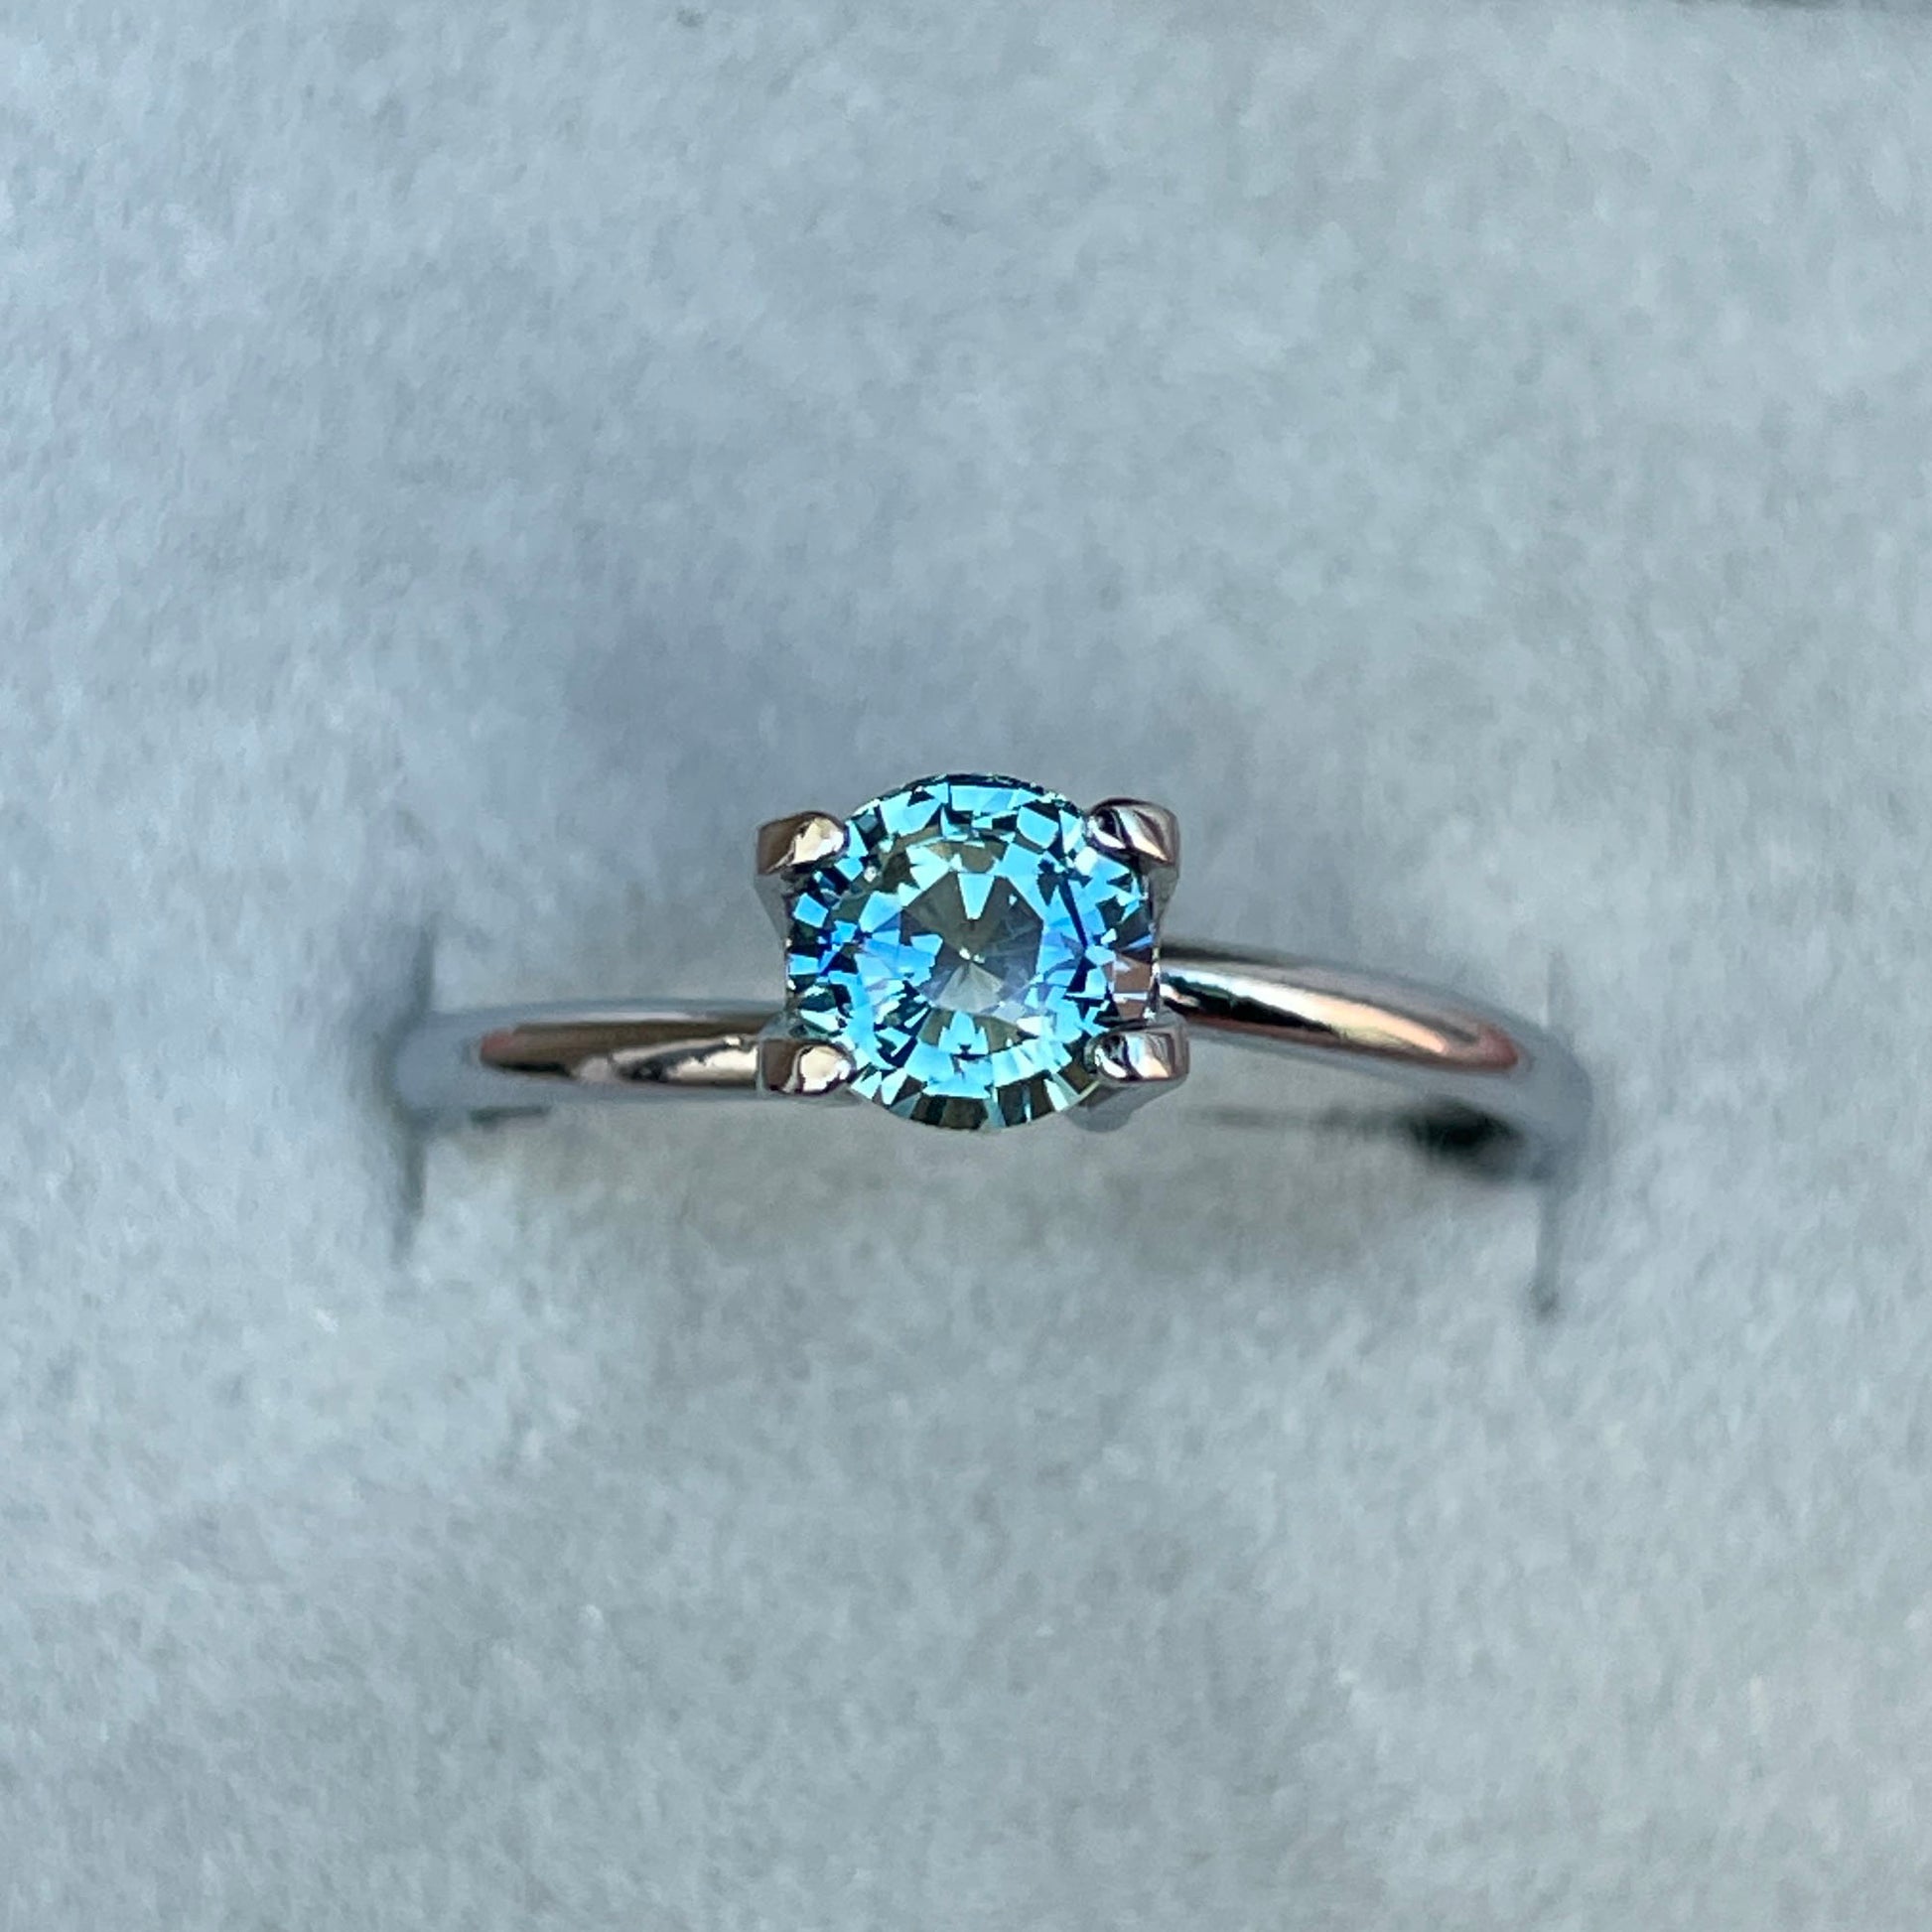 1.00 crt for Teal Sapphire Ring, Blue Green Sapphire, Wedding Bridal ring, Big Sur teal sapphire